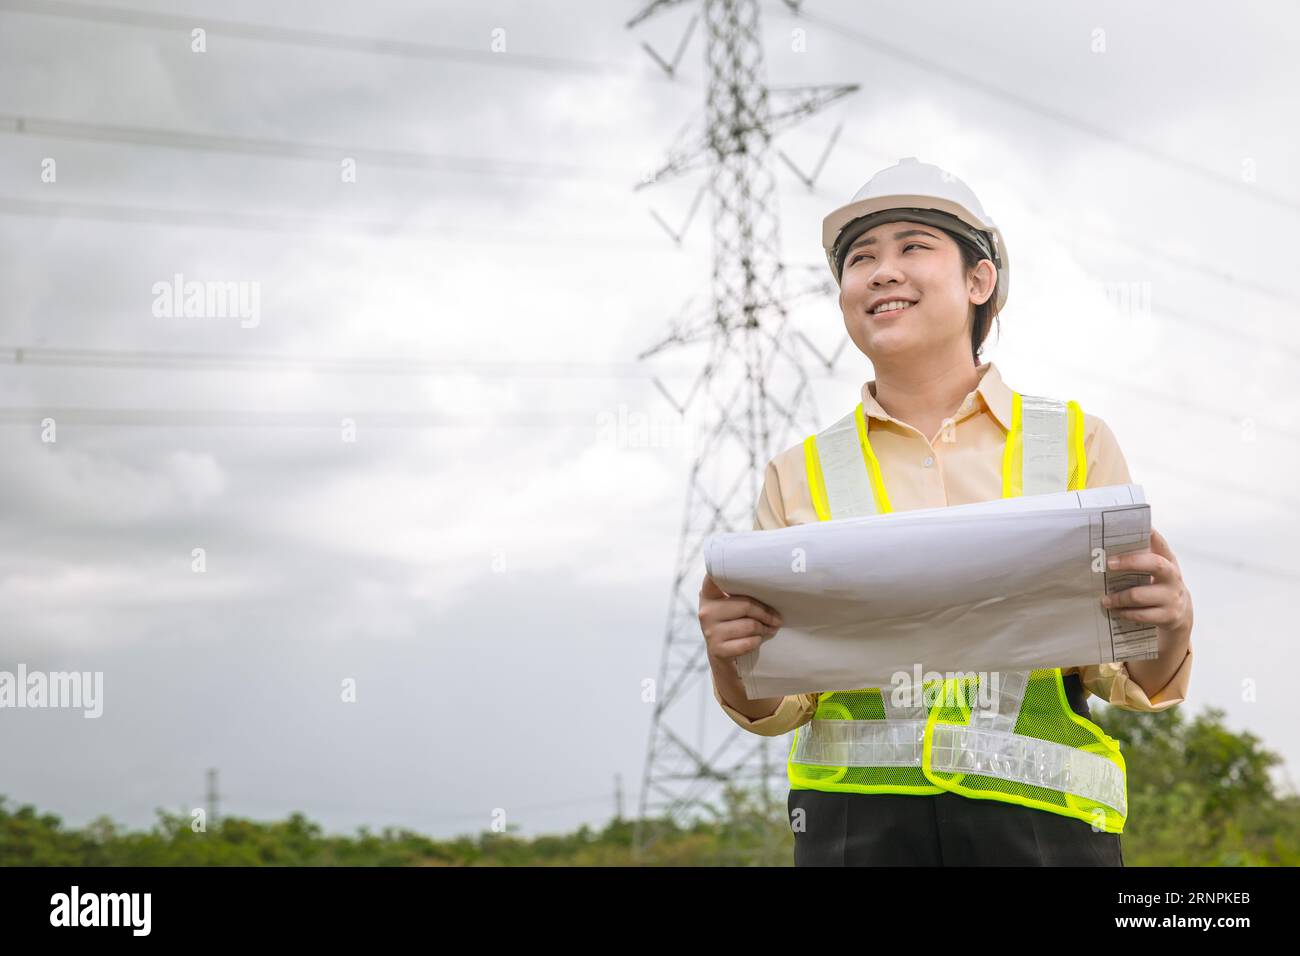 Happy engineer woman happy smiling with high voltages electricity transmission pole building project on background Stock Photo